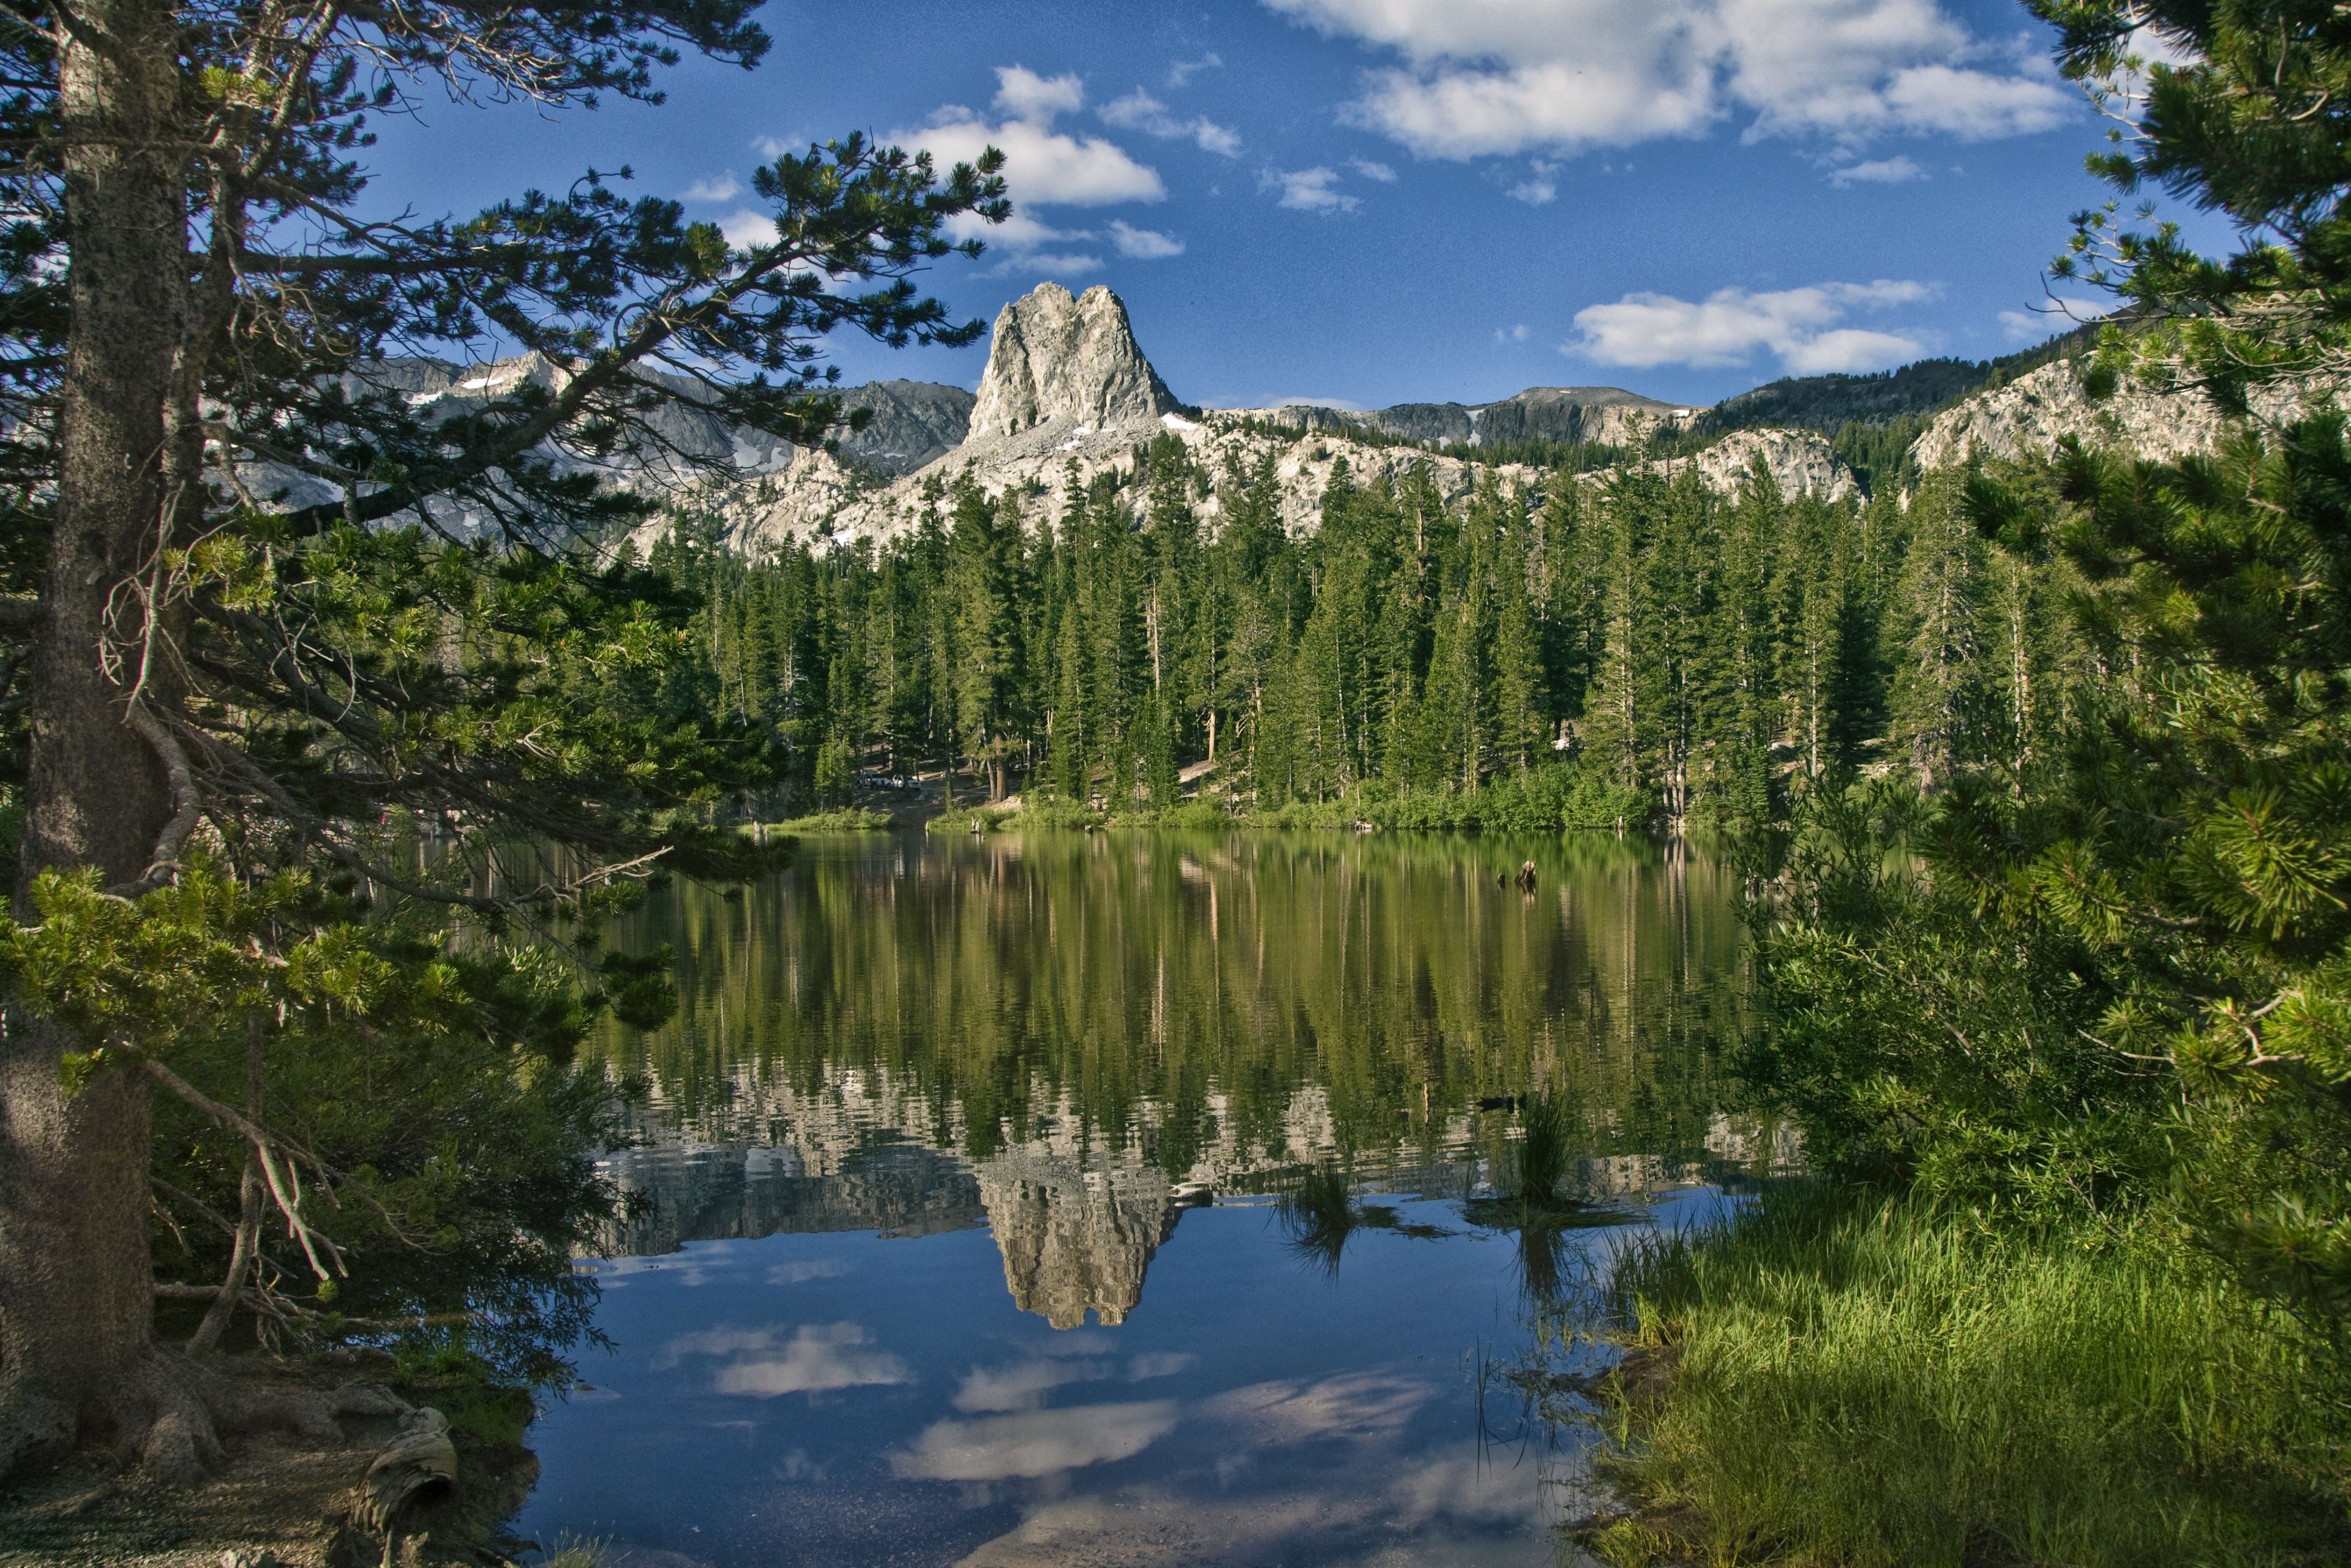 A forest surrounds a lake with mountains in the background.